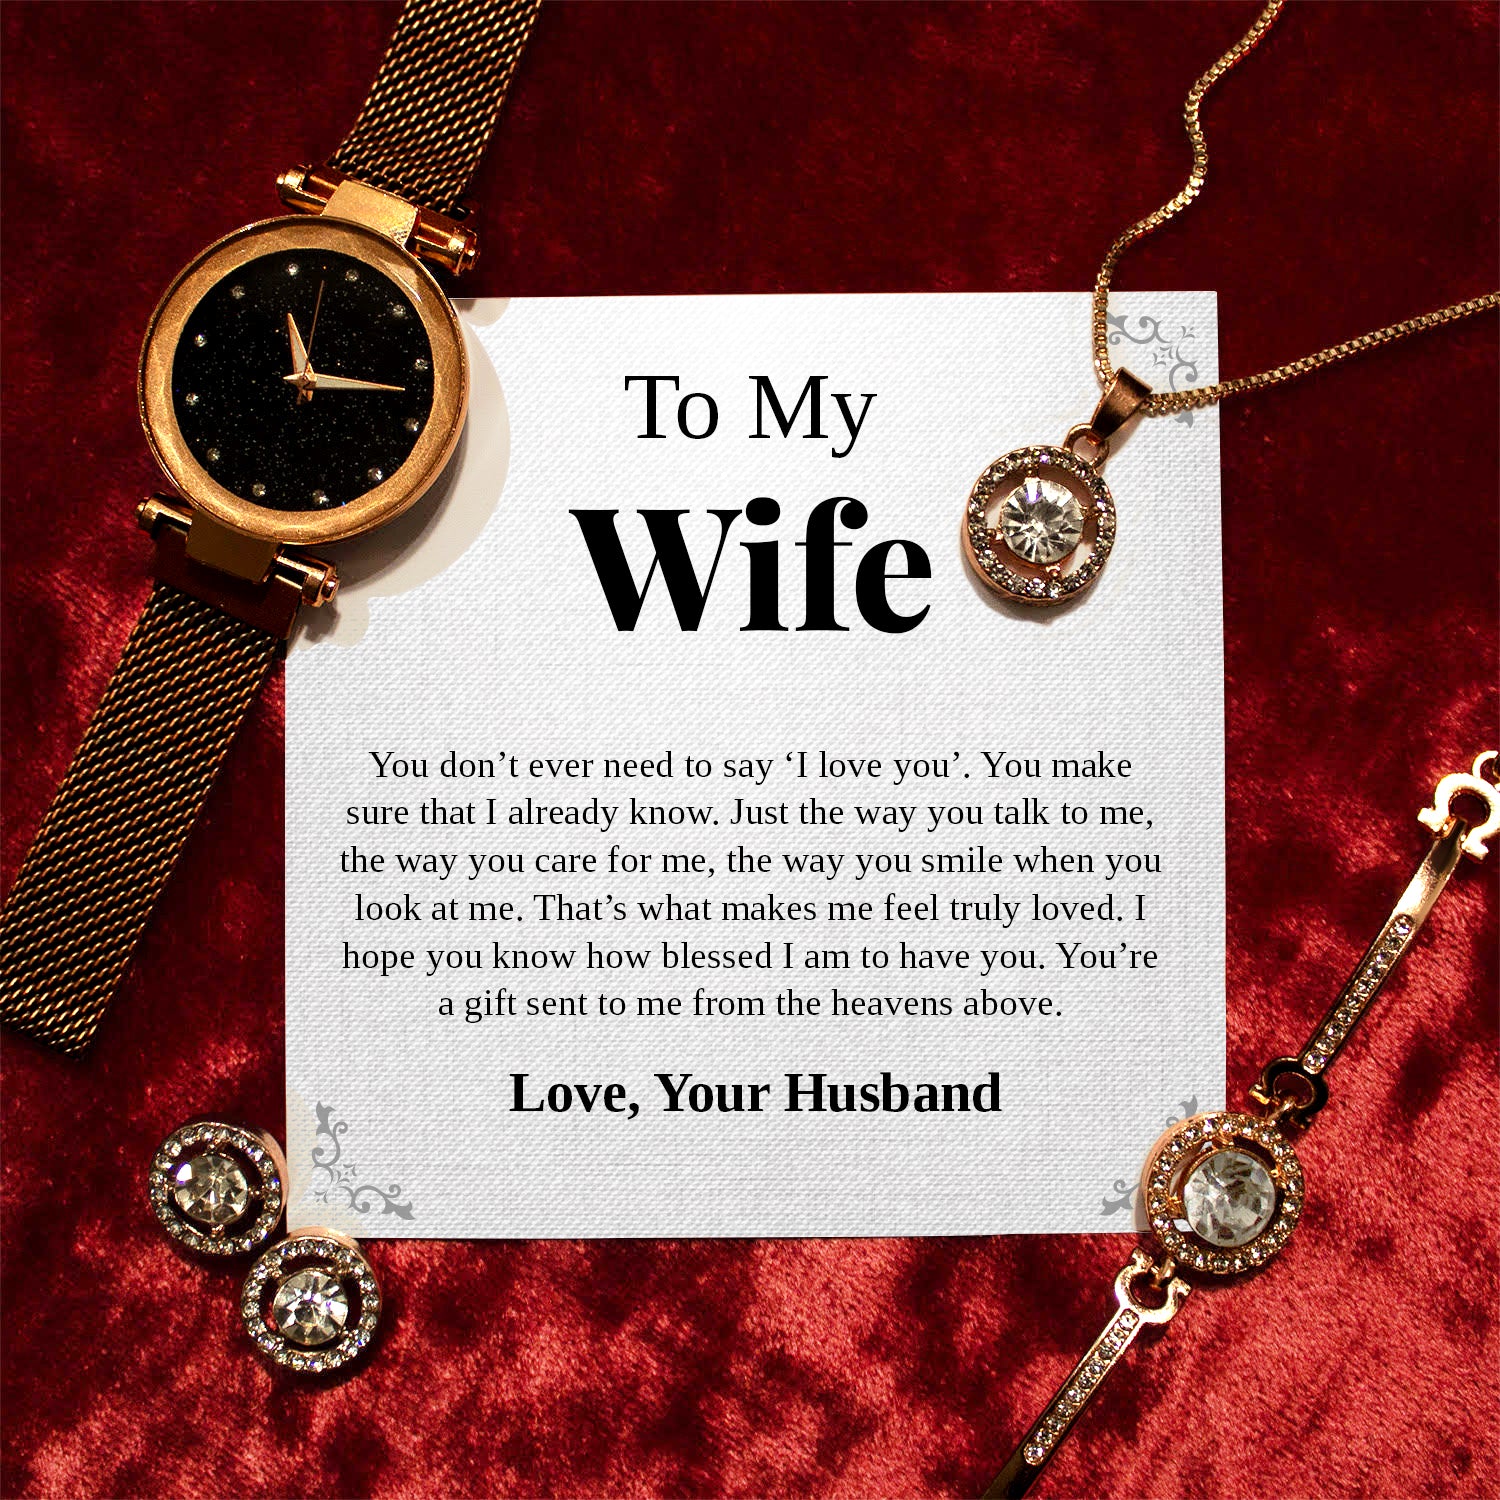 To My Wife | "Truly Loved" | Cosmopolitan Set